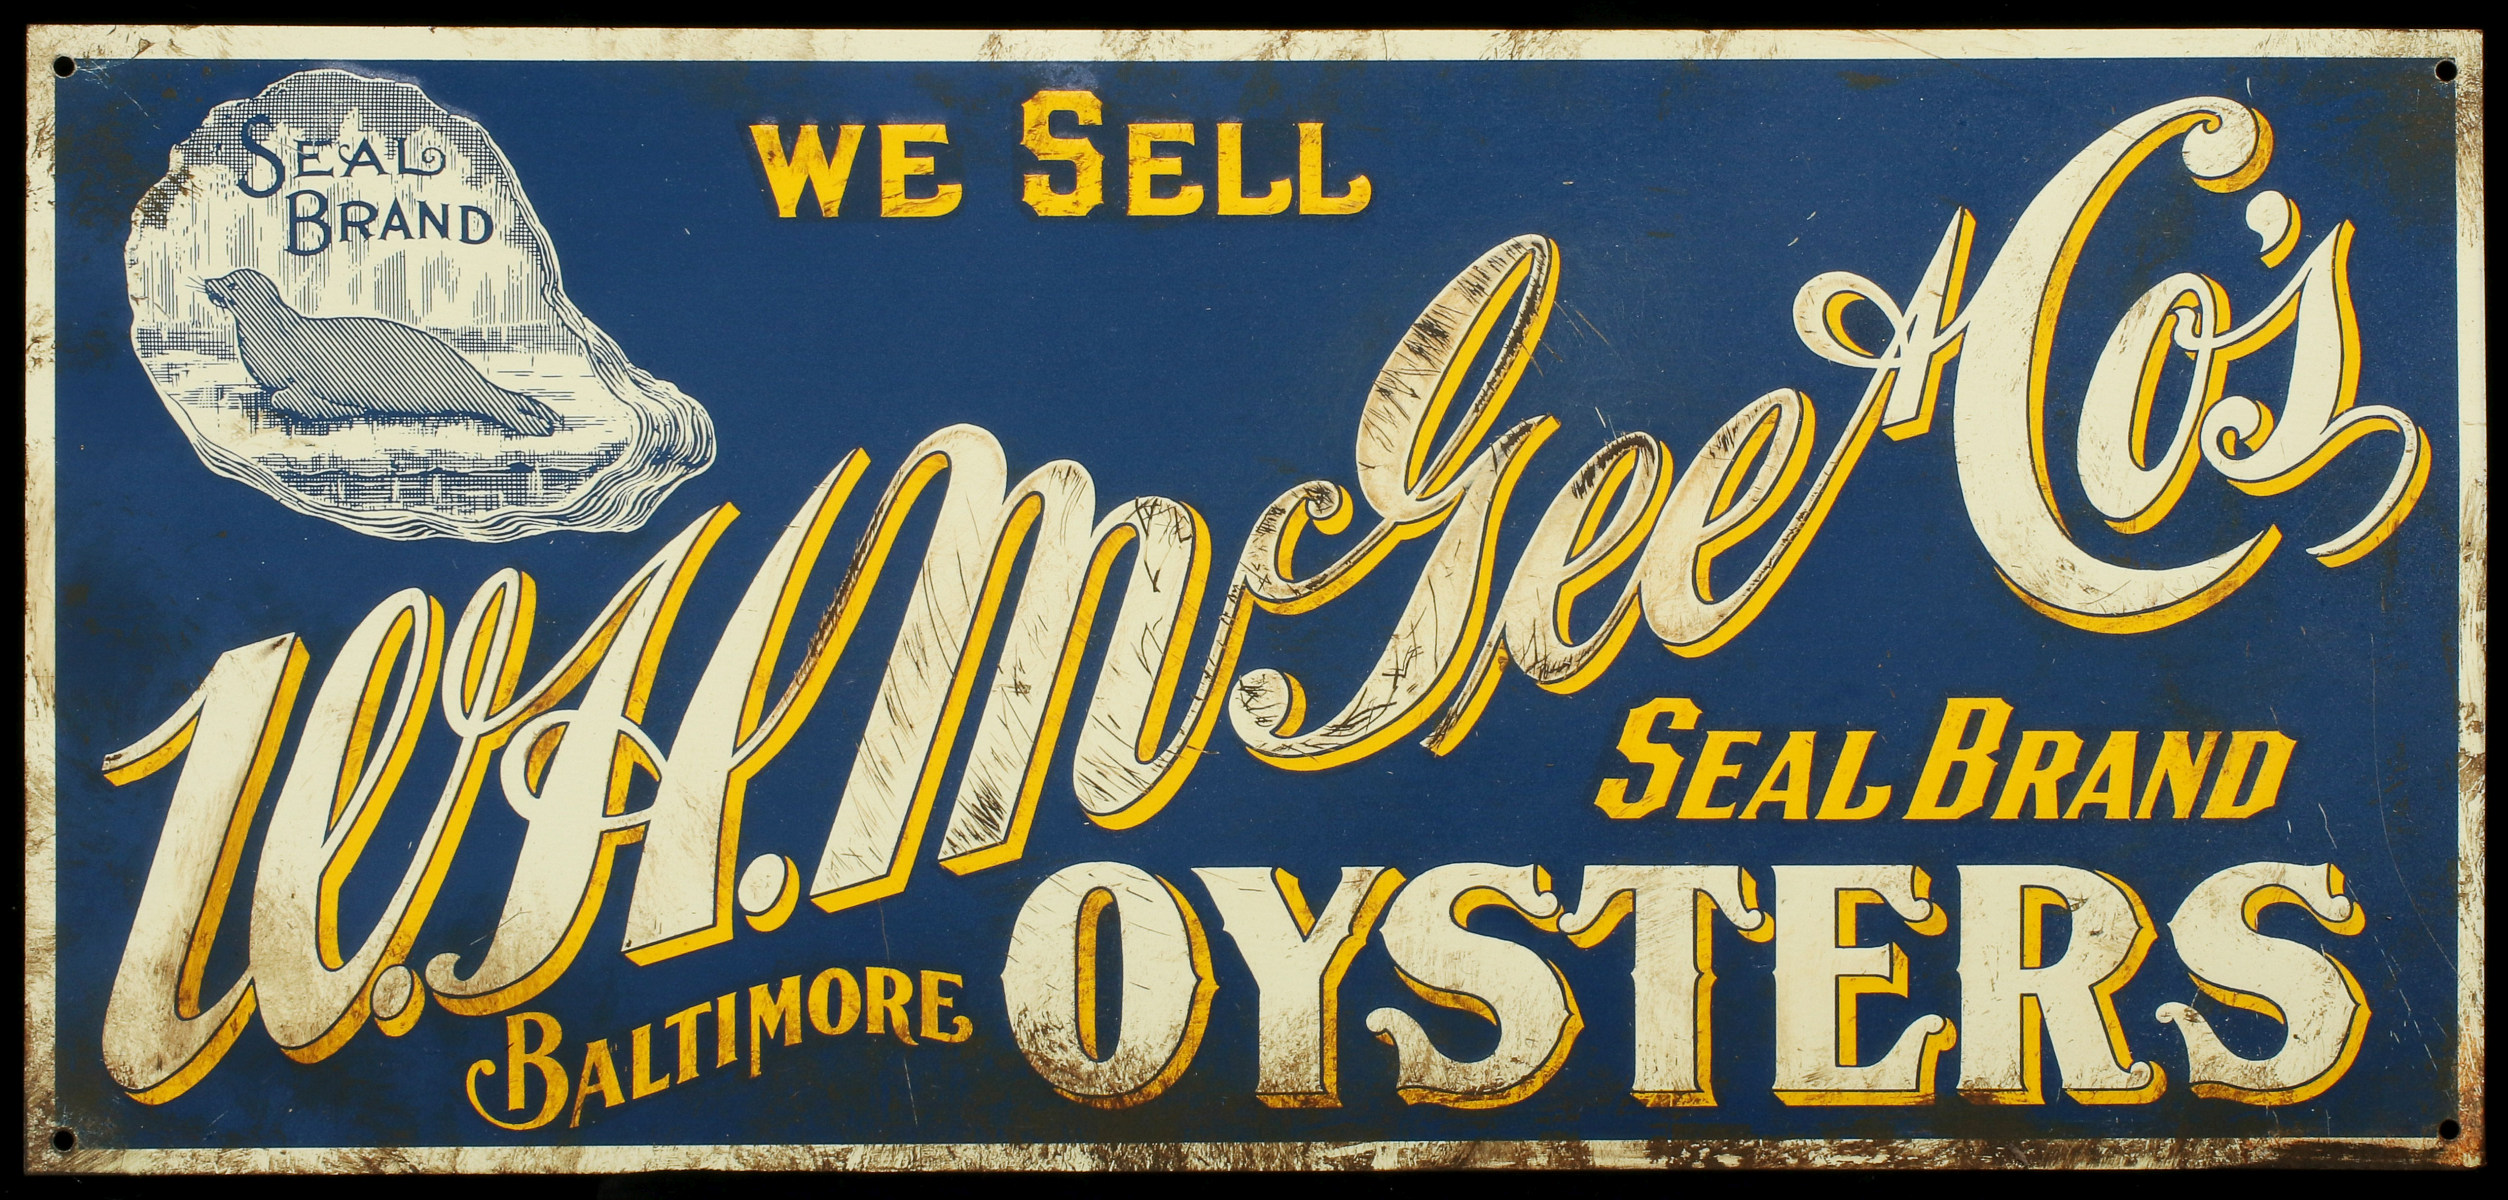 AN EARLY 20TH C., SEAL BRAND OYSTERS ADVERTISING SIGN